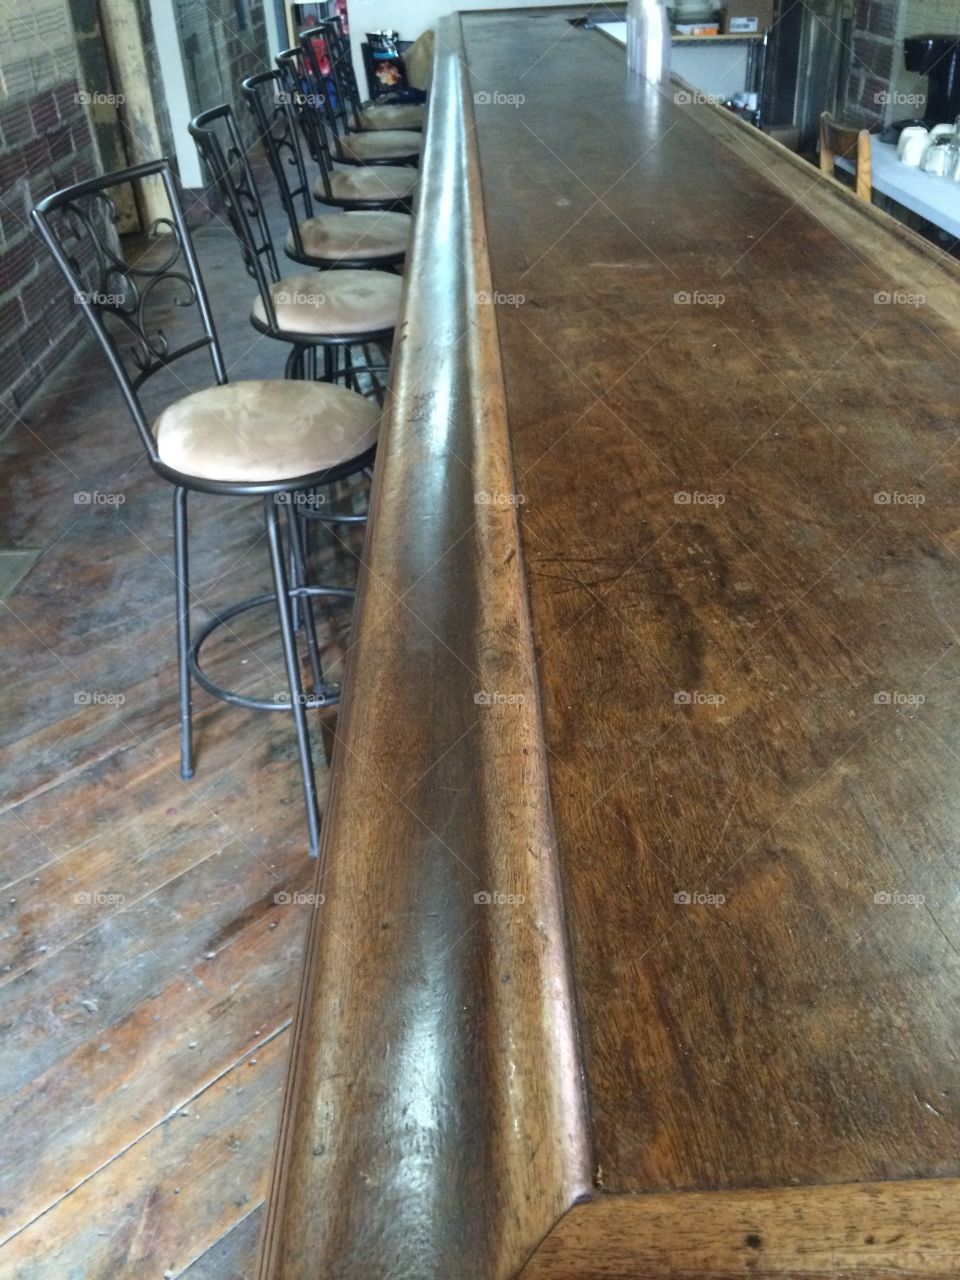 Bar
Stained
Vintage
Wood
City
